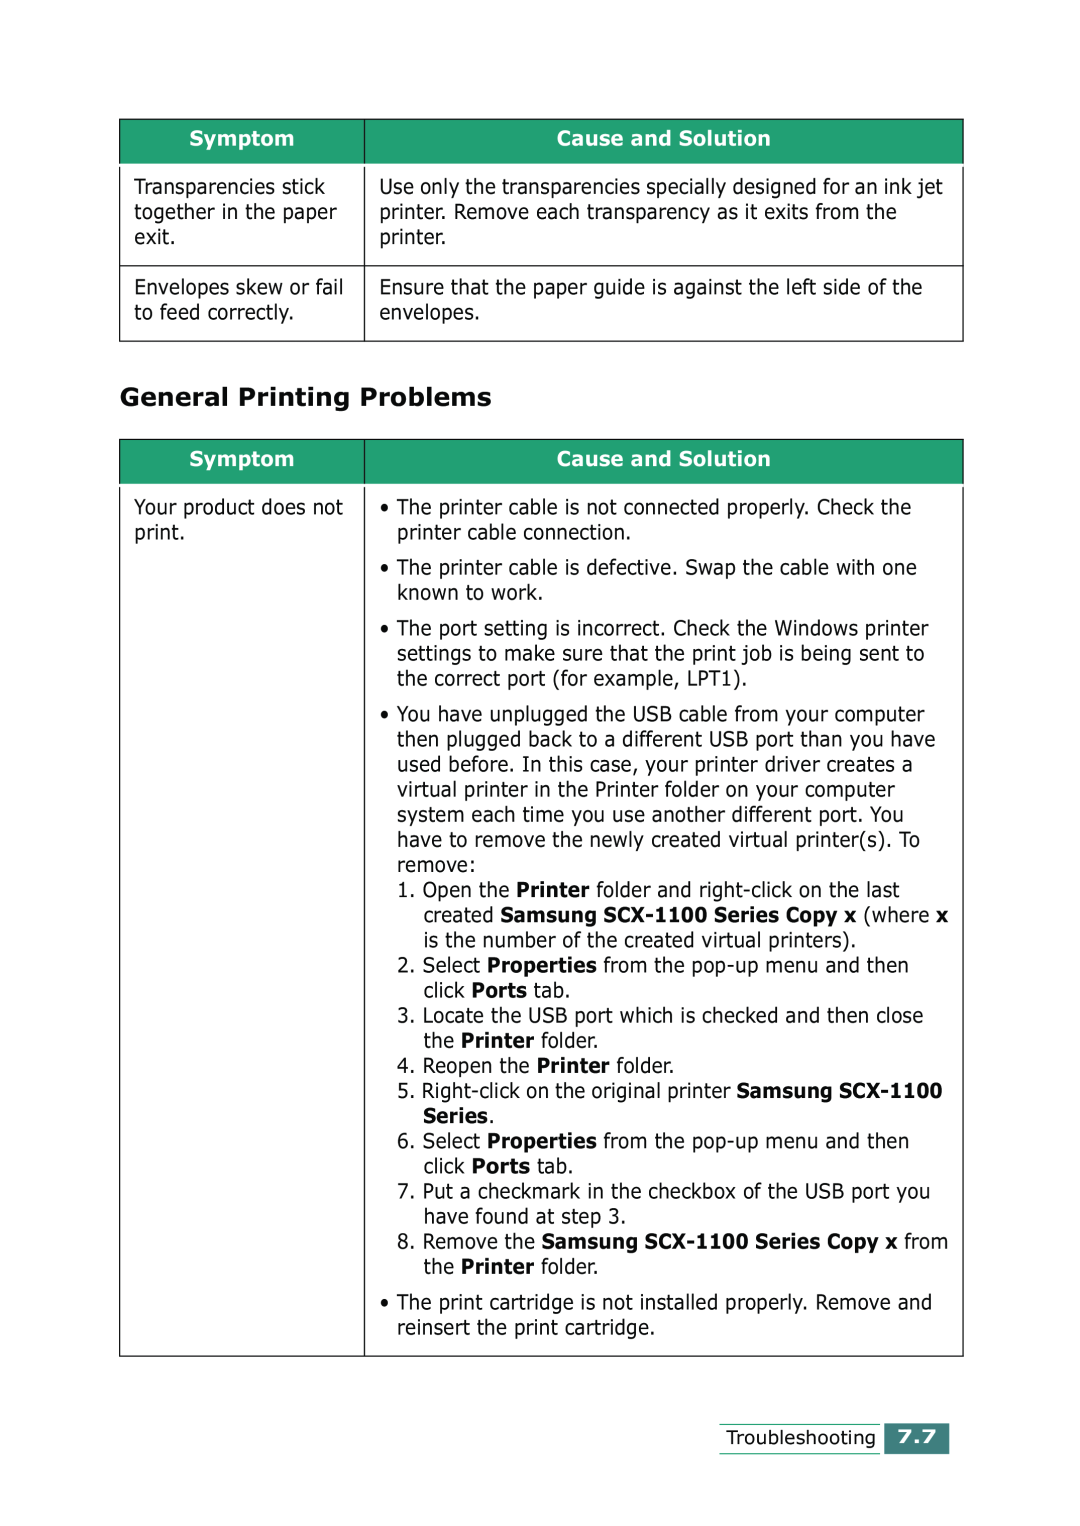 Samsung SCX-1100 manual General Printing Problems, Series, Symptom, Cause and Solution 